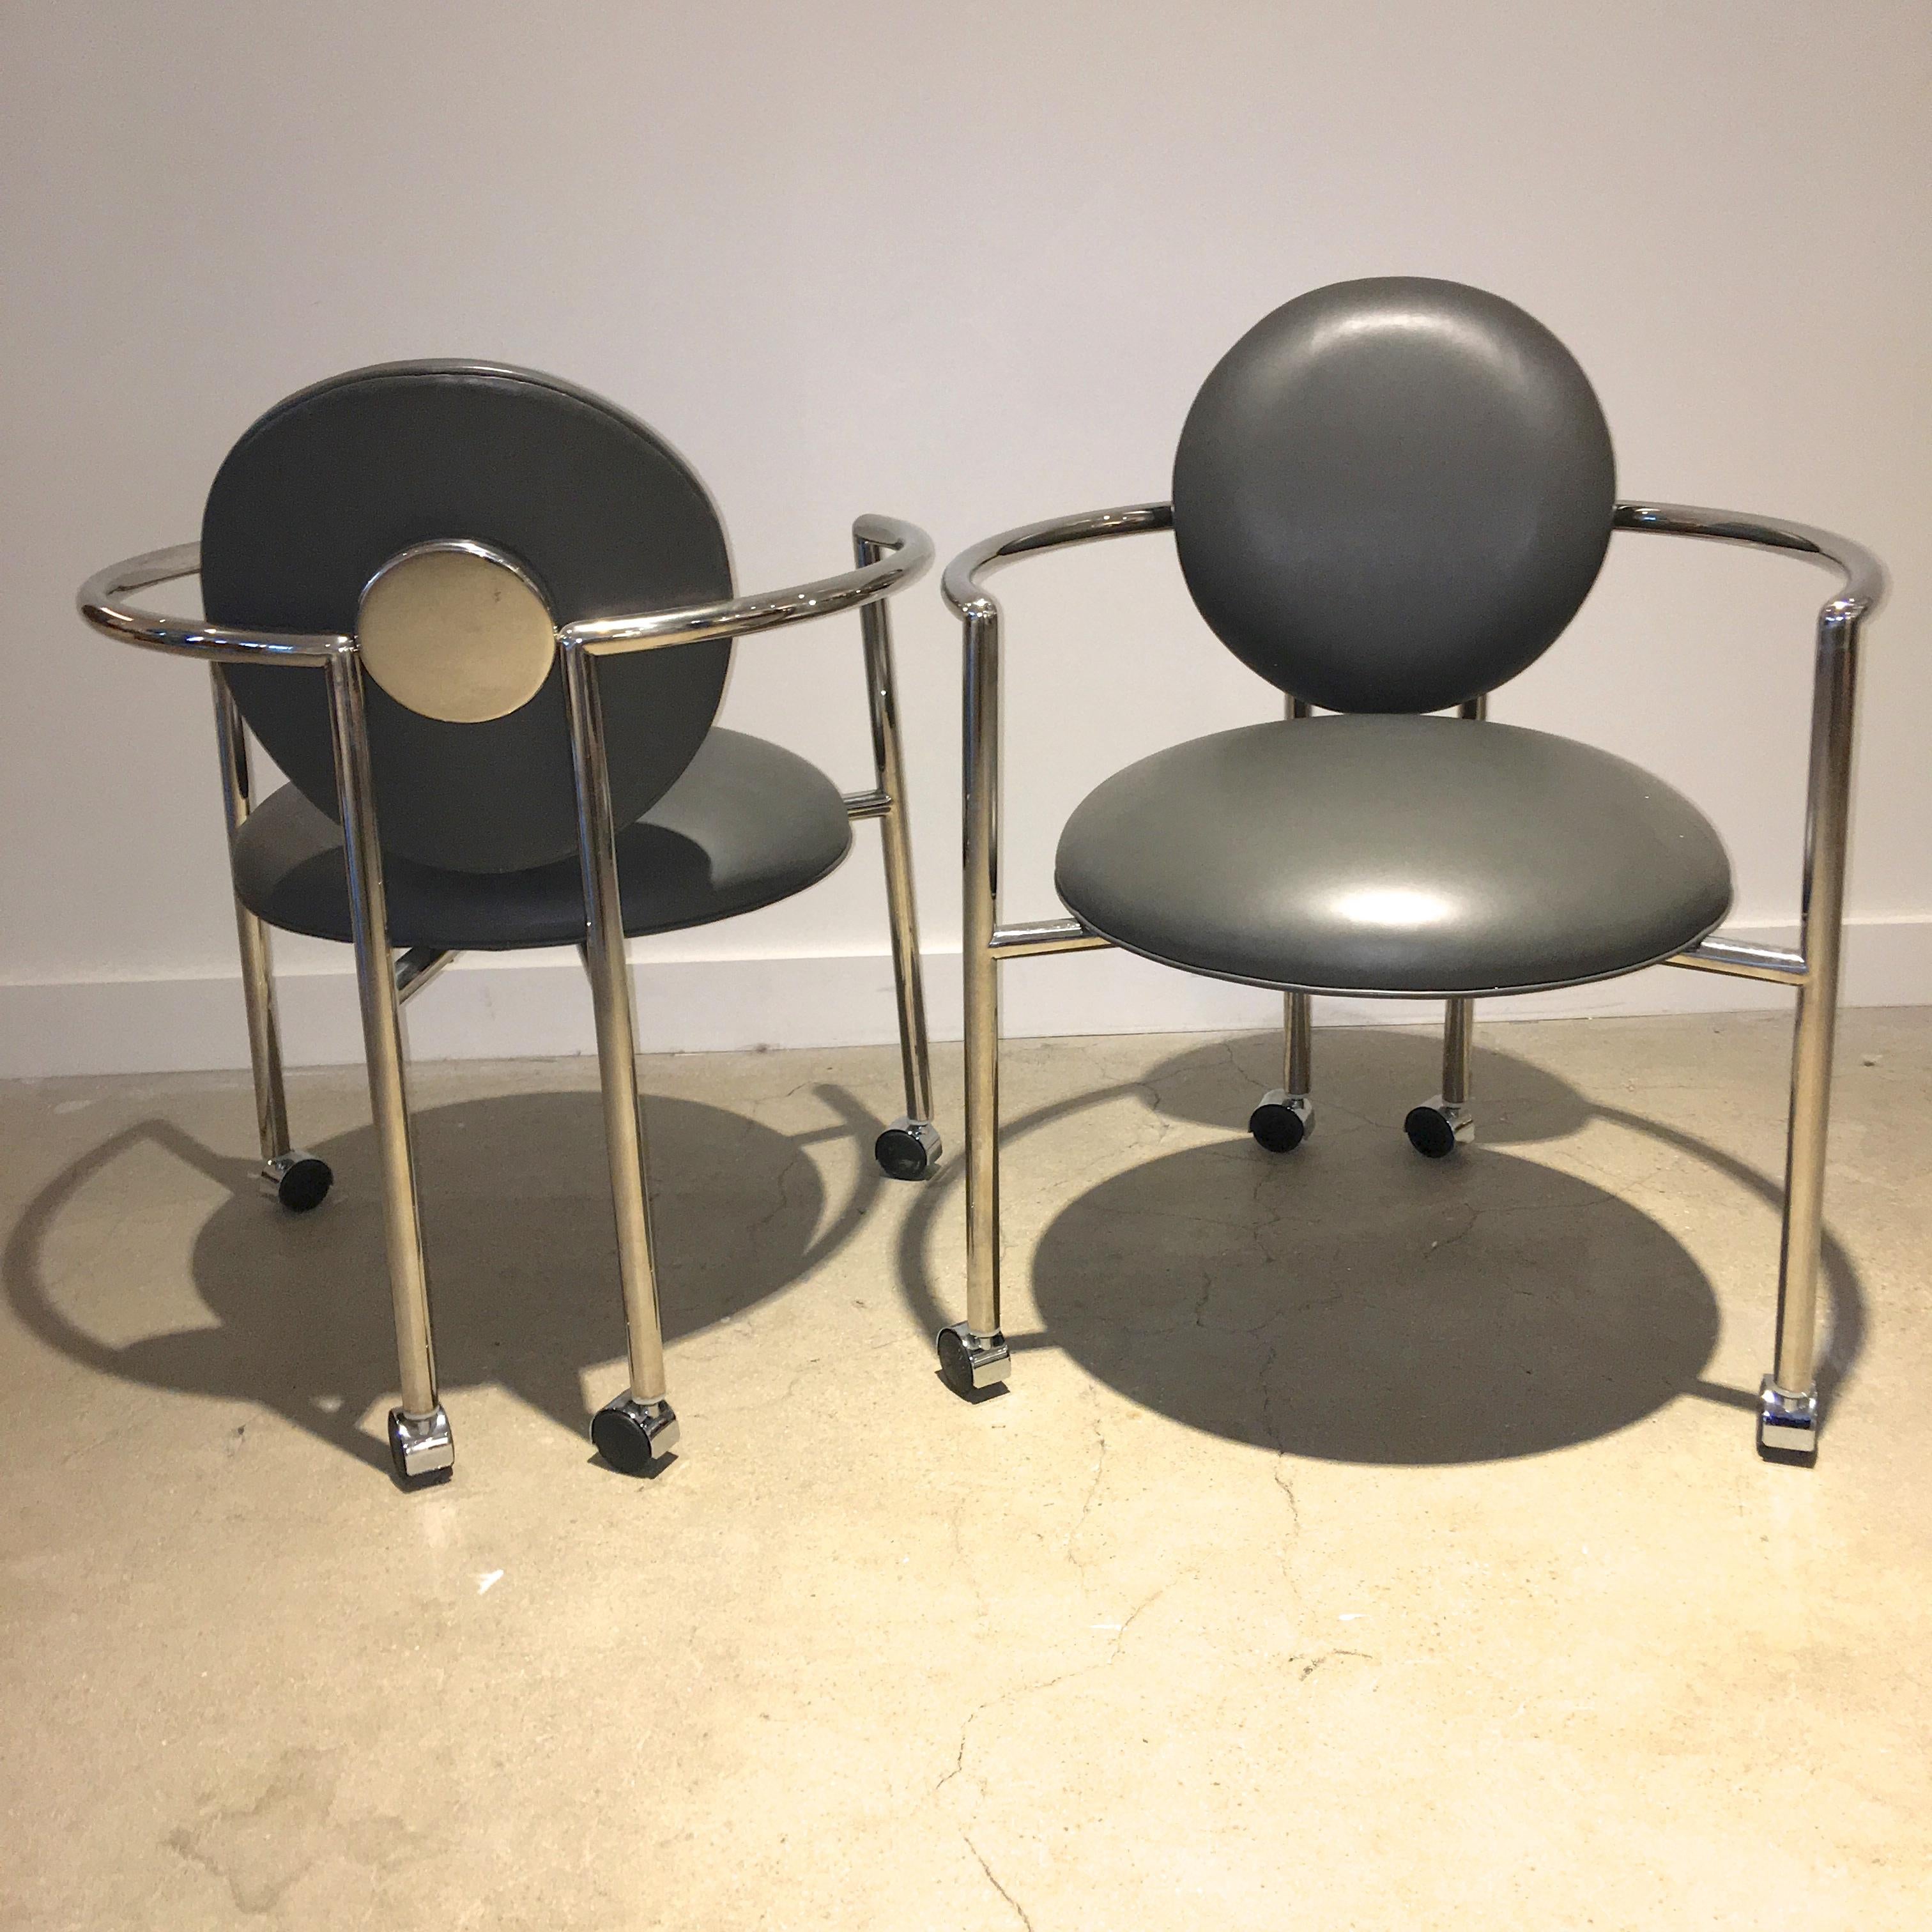 Pair of Moon Chairs by Stanley Jay Friedman for Brueton (amerikanisch)